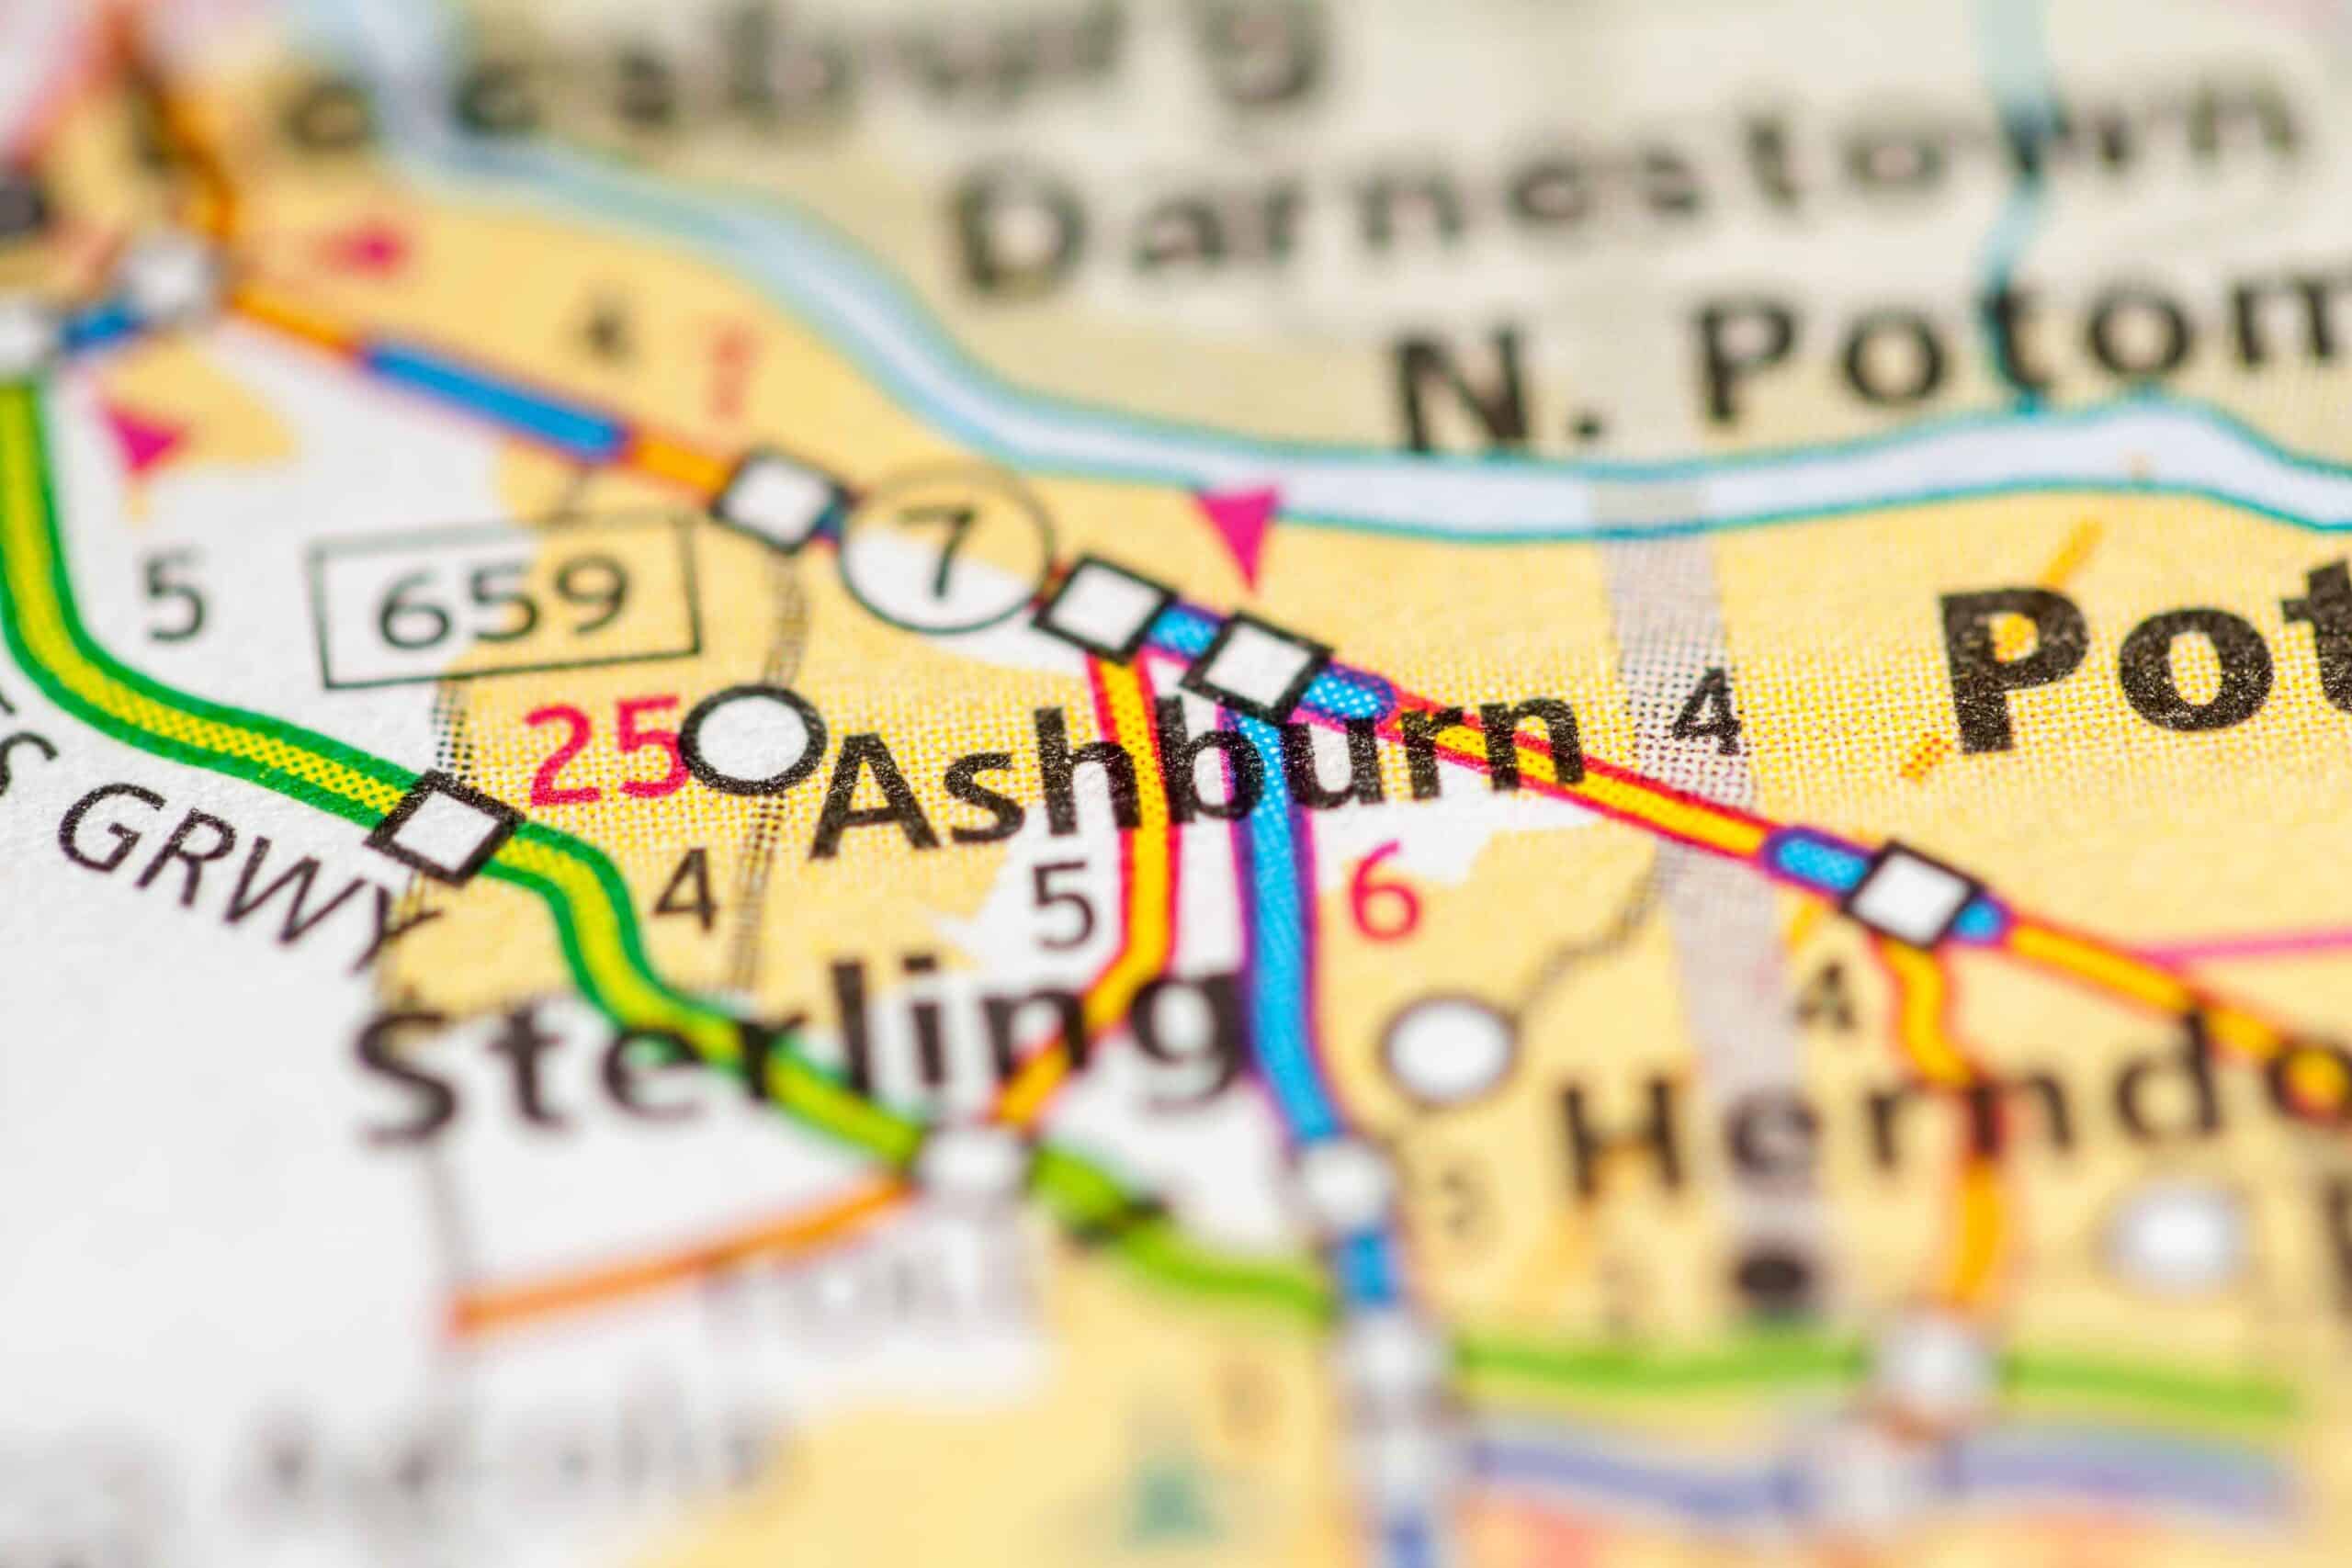 Location of Ashburn VA displayed on a map